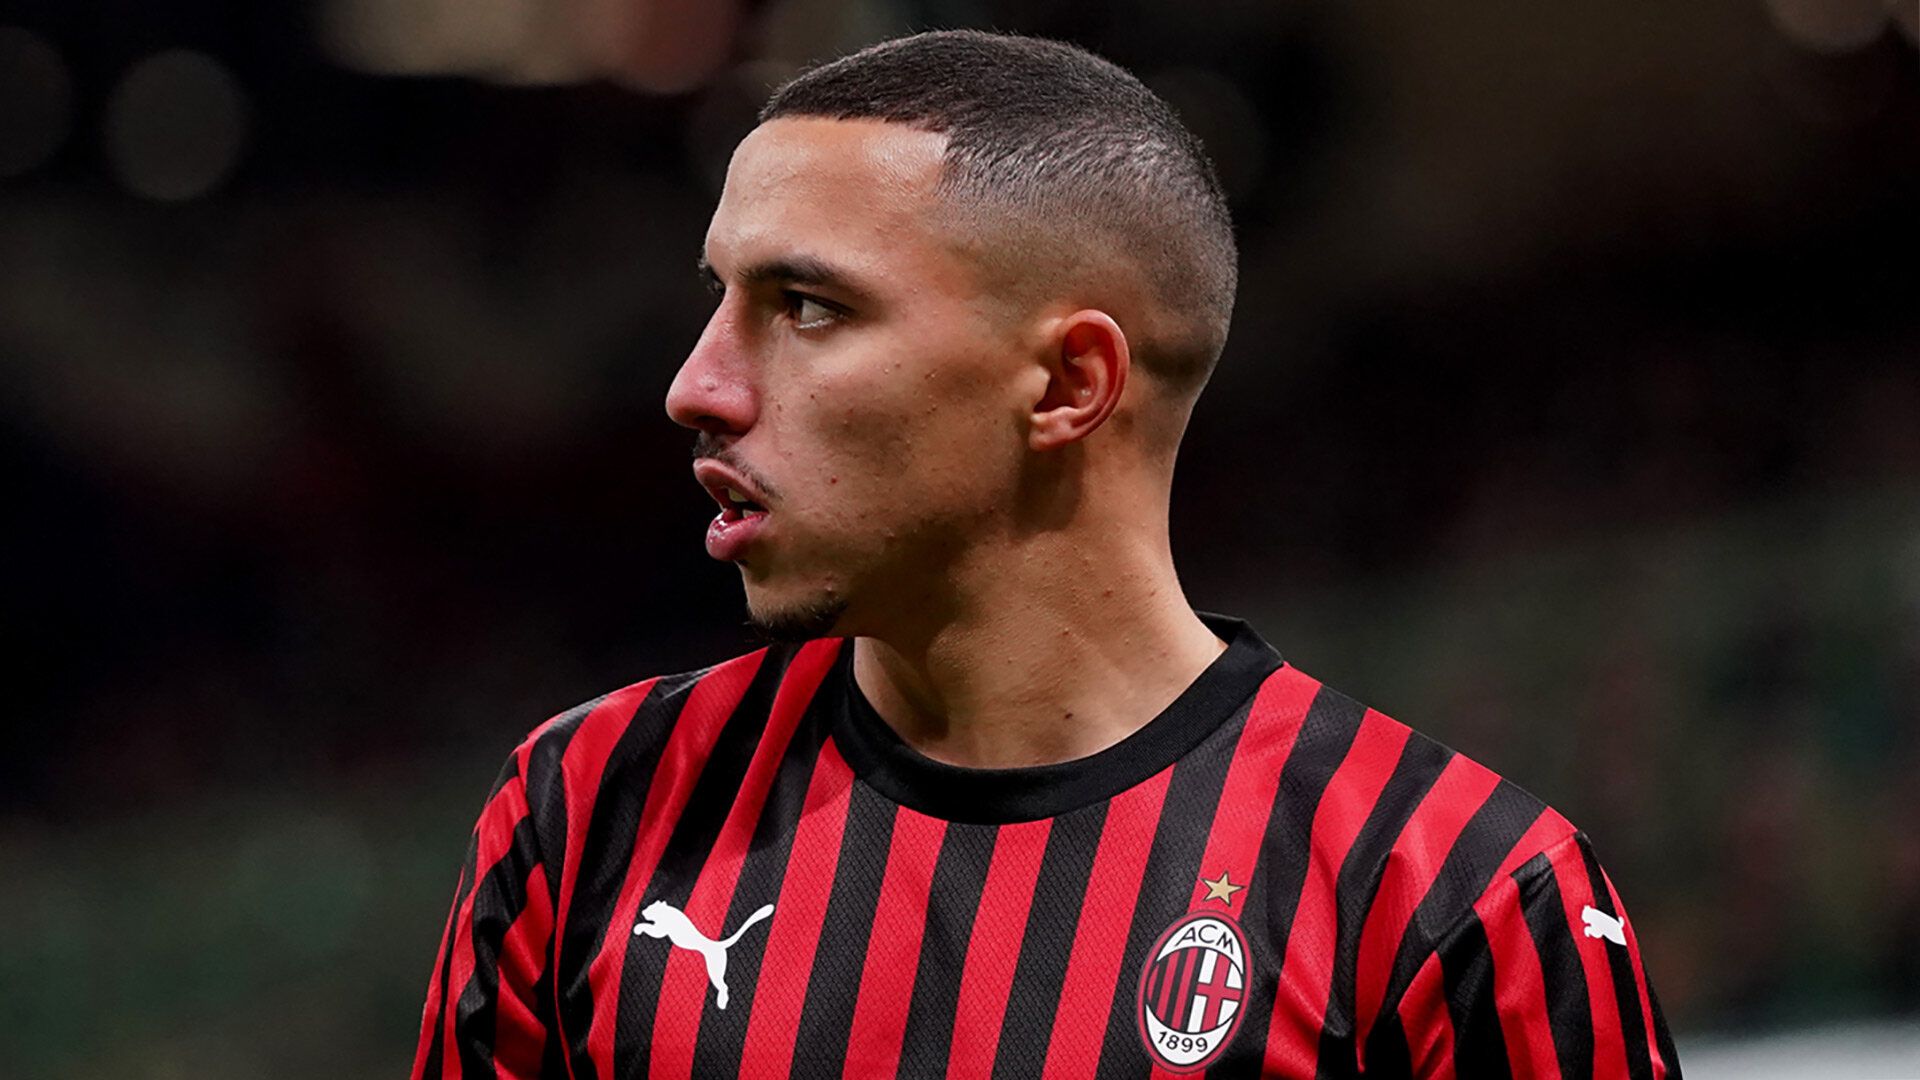 Bennacer: I didn't sleep much after losing to Inter